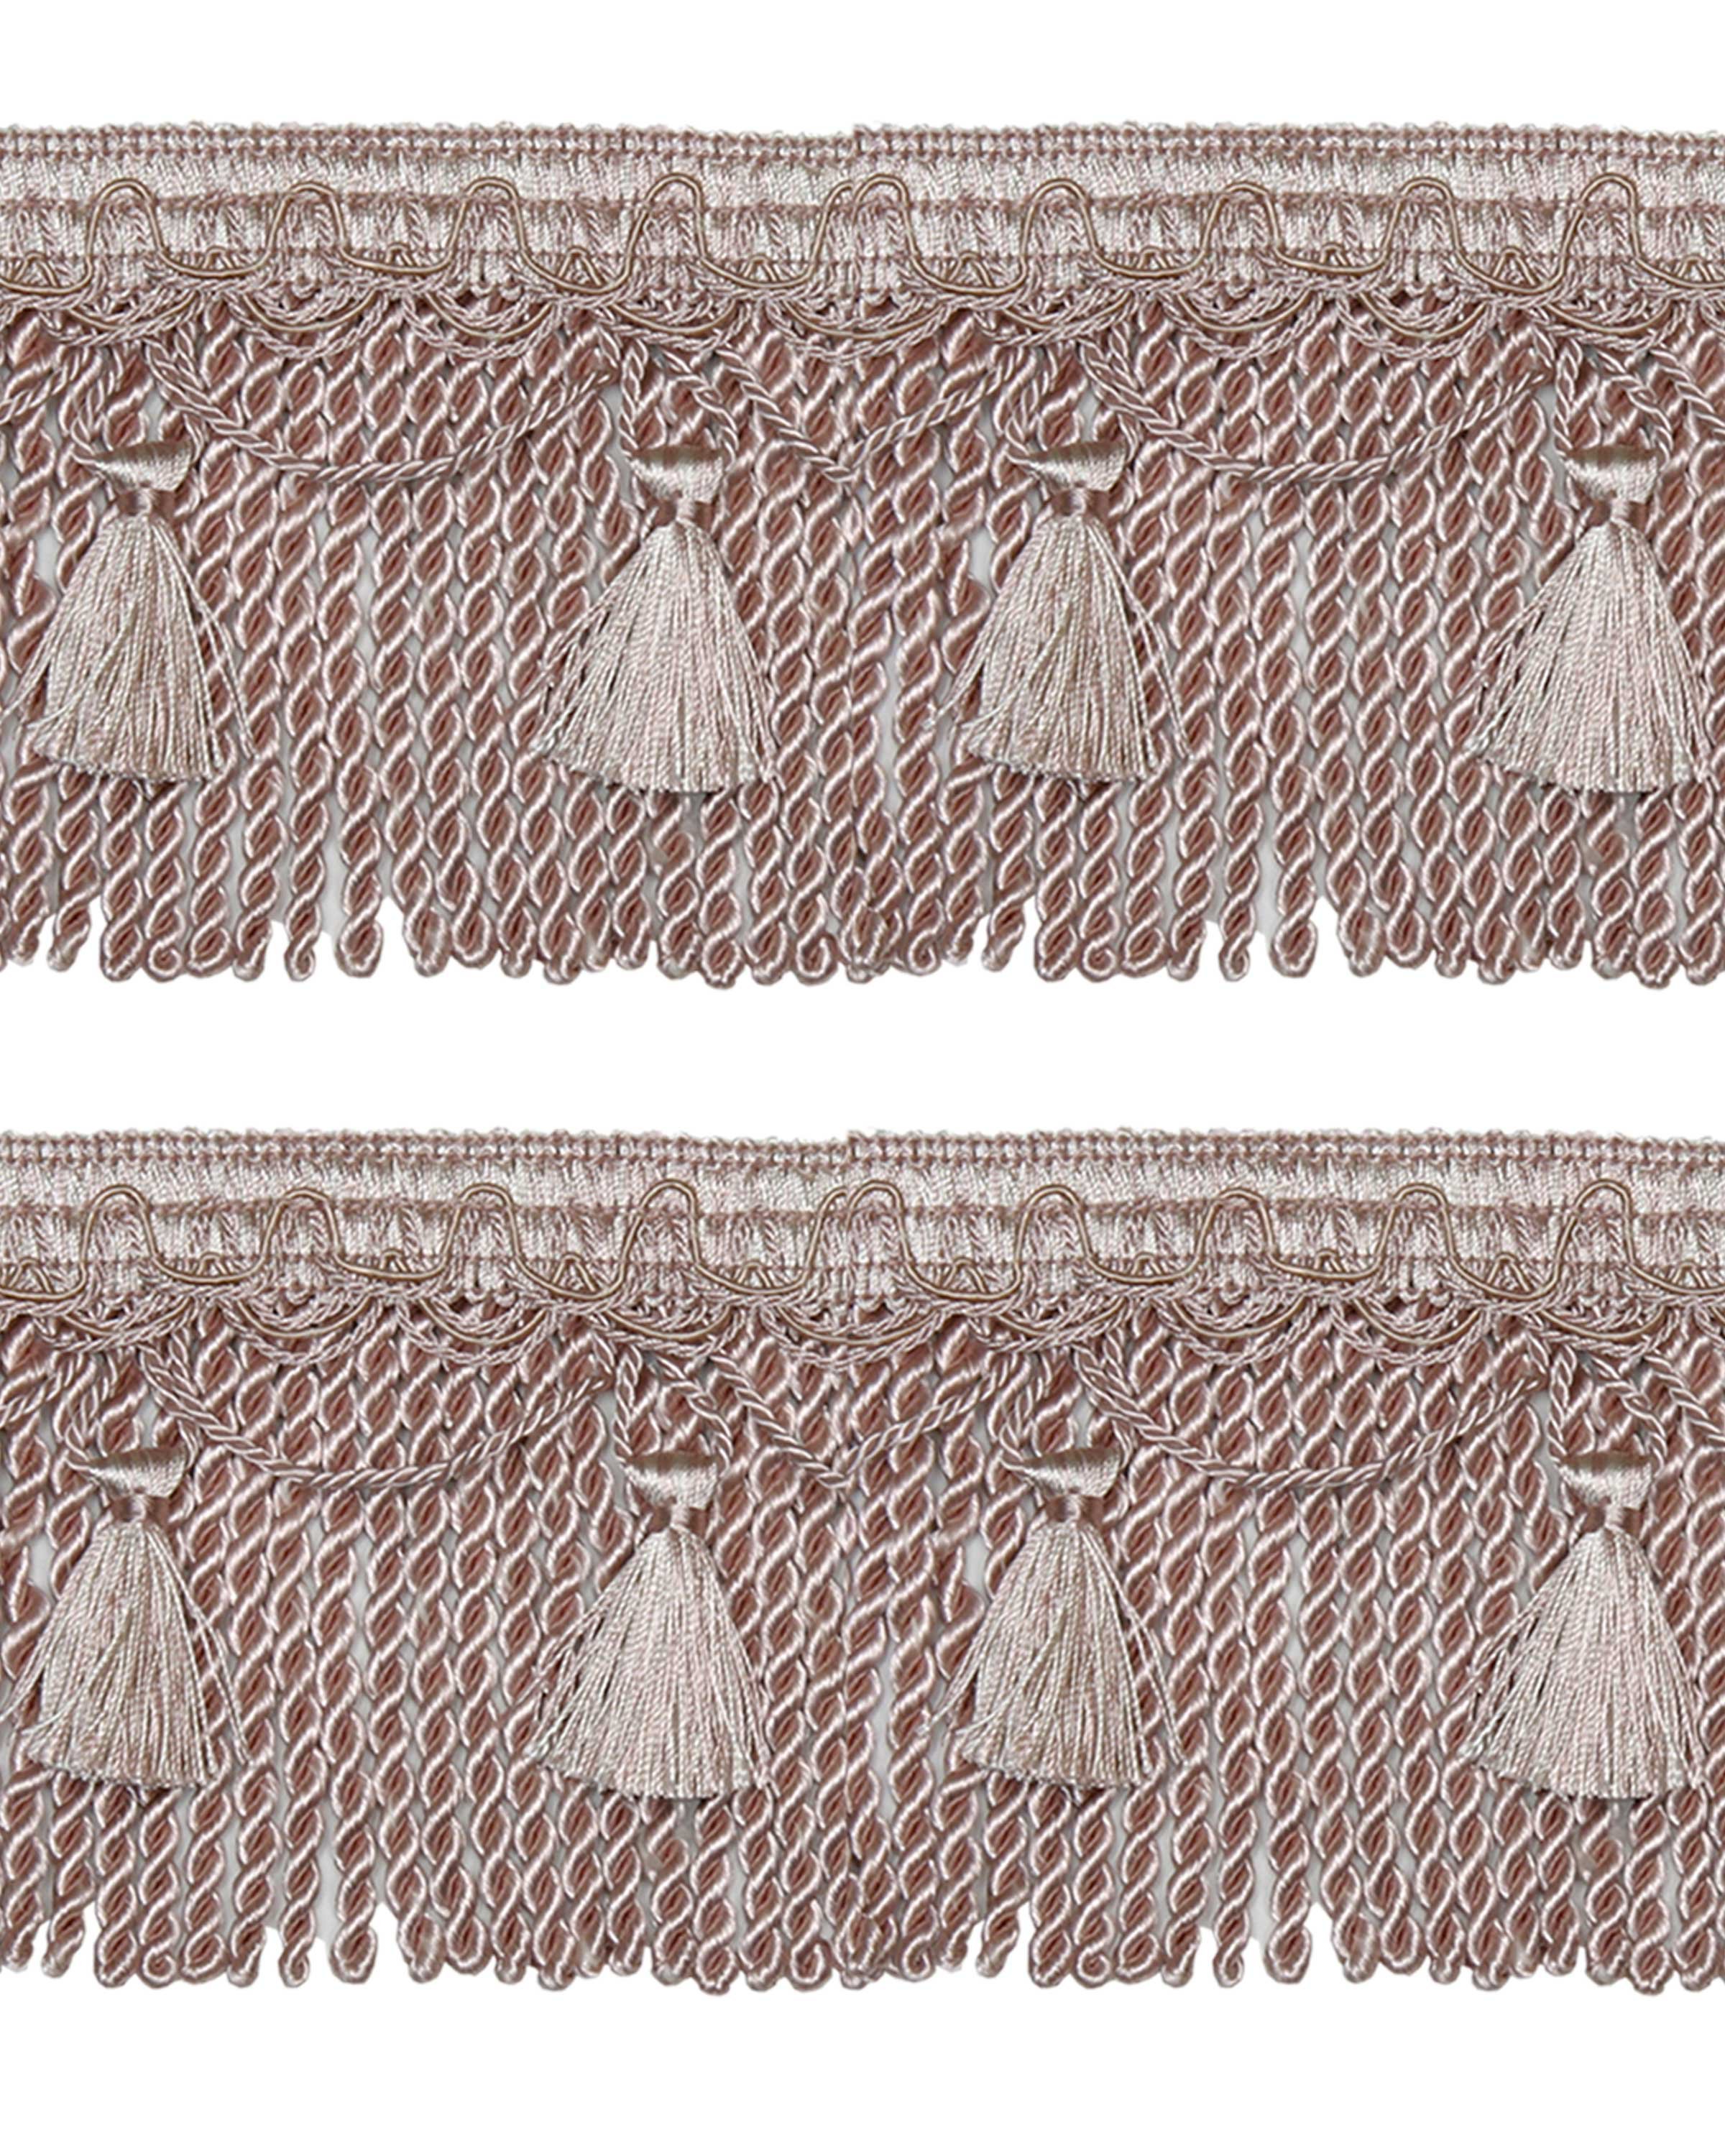 Bullion Cord Fringe on Braid with Scalloped Tassel - Pale Pink 105mm Price is for 5 metres